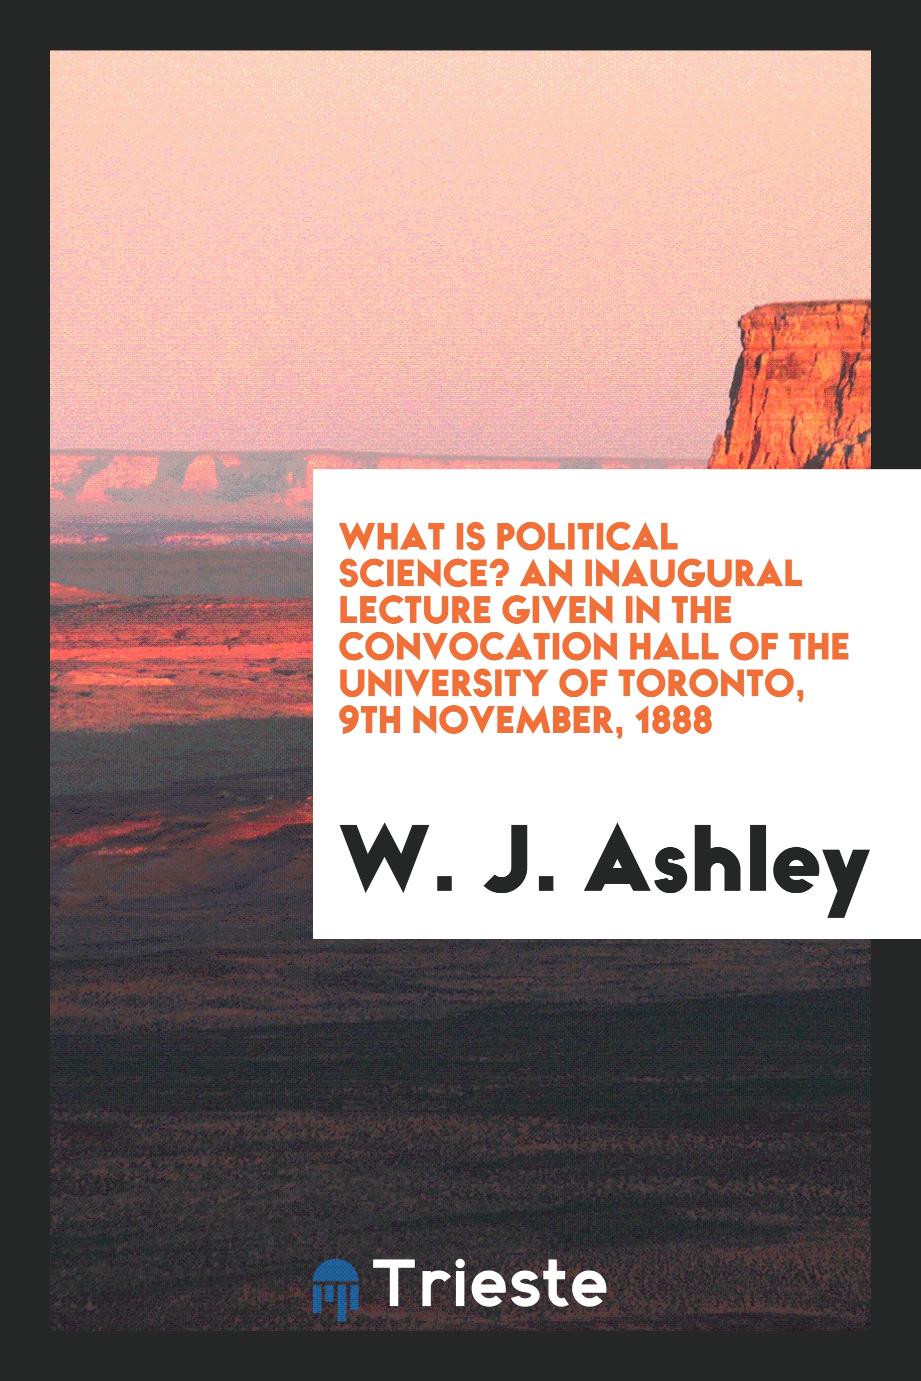 What is Political Science? An Inaugural Lecture Given in the Convocation Hall of the University of Toronto, 9th November, 1888